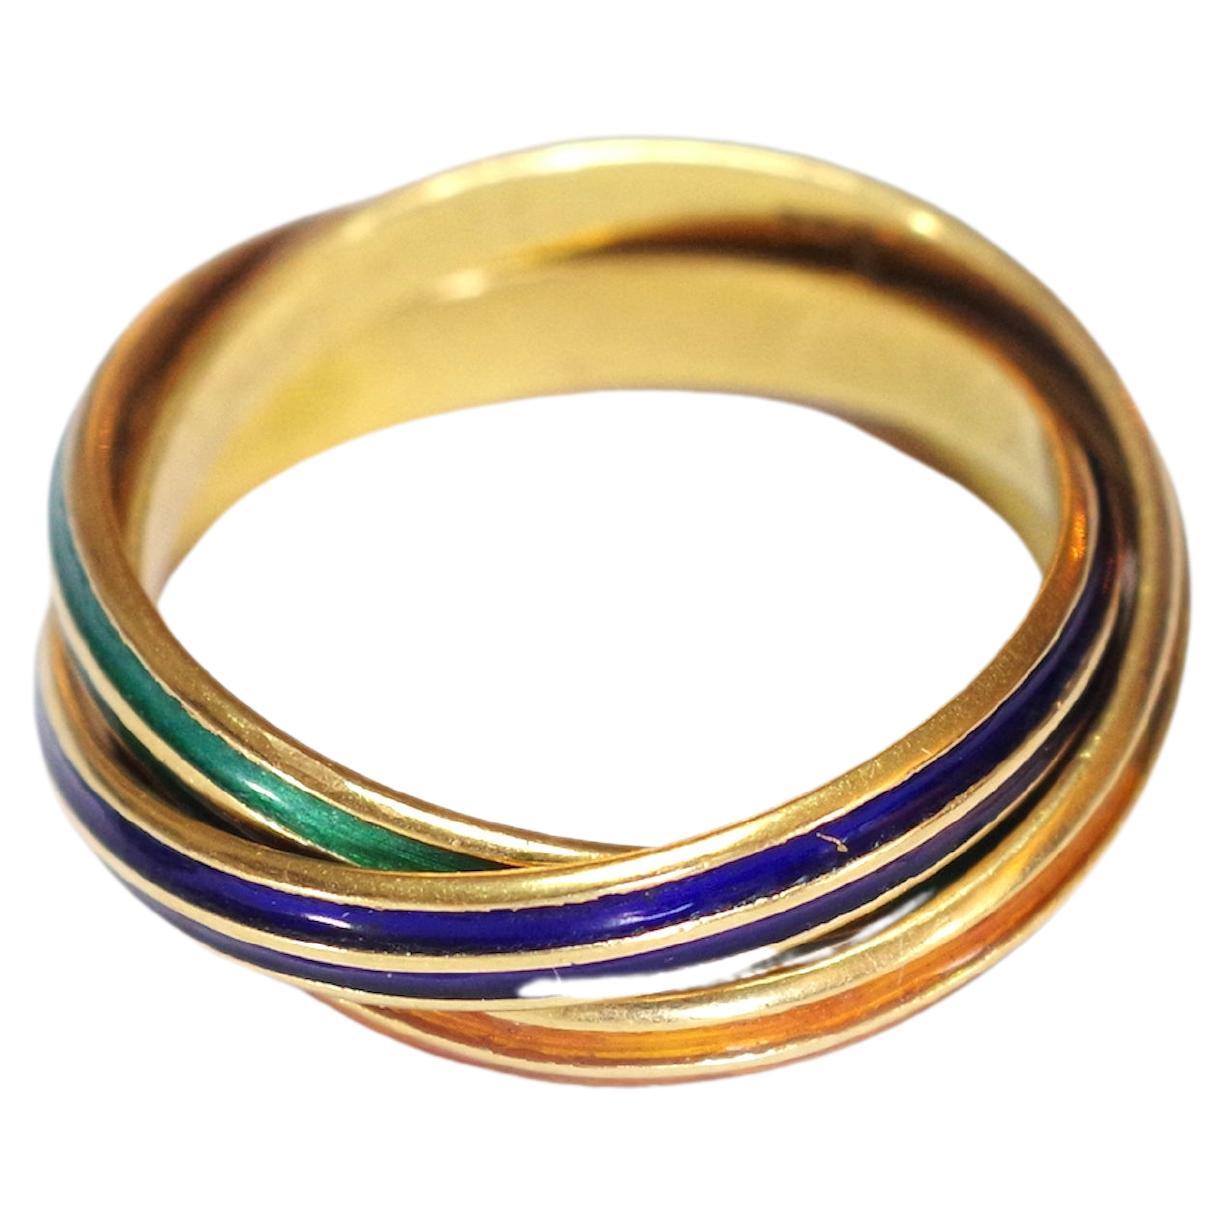 Cartier Style Trinity Enamel Ring in 18k Gold For Sale